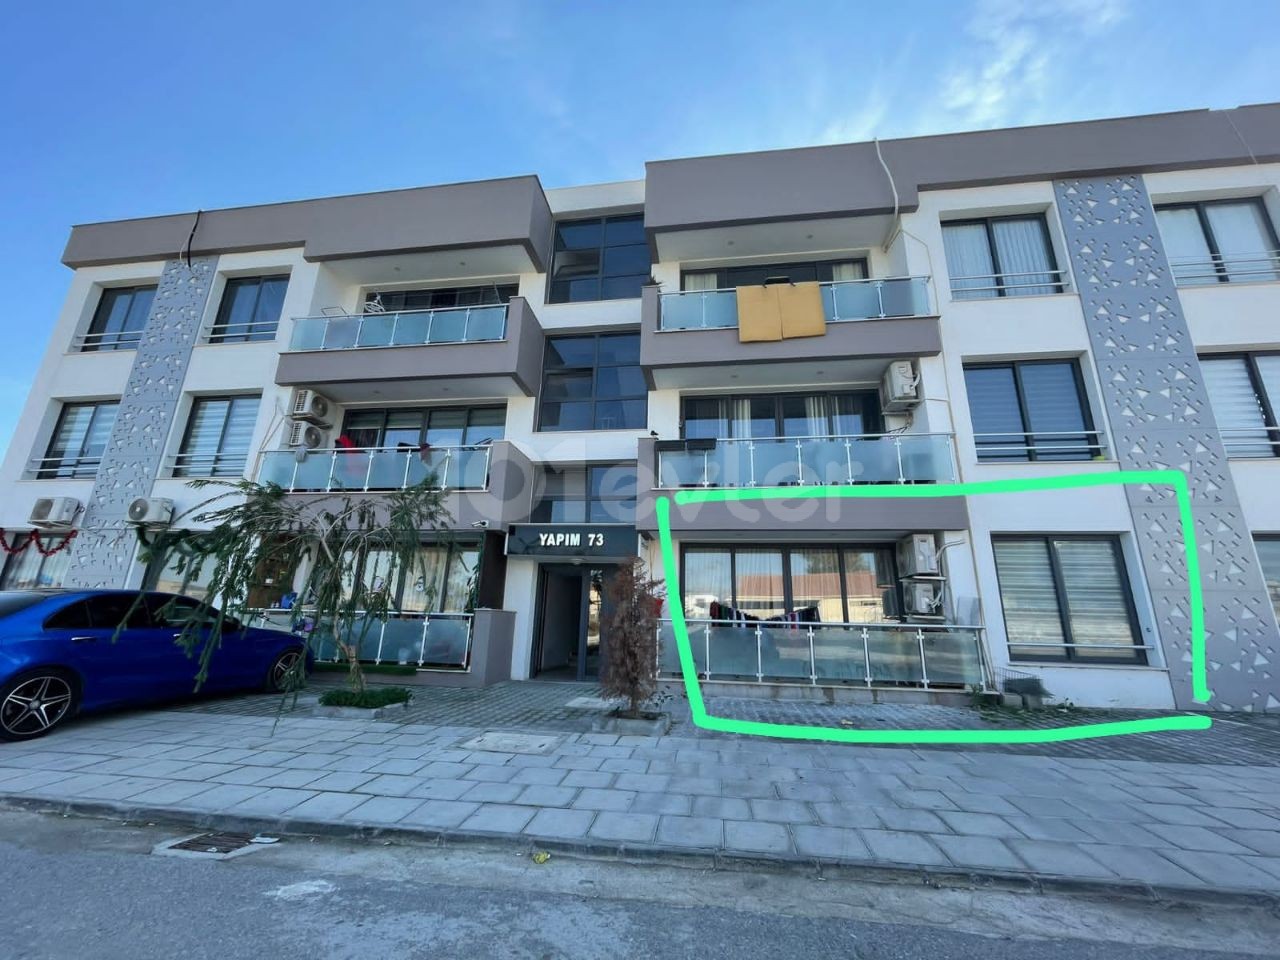 OUR 3 + 1 GROUND FLOOR OPPORTUNITY FLAT IN HAMİTKÖY IS WAITING FOR ITS NEW BUYER.